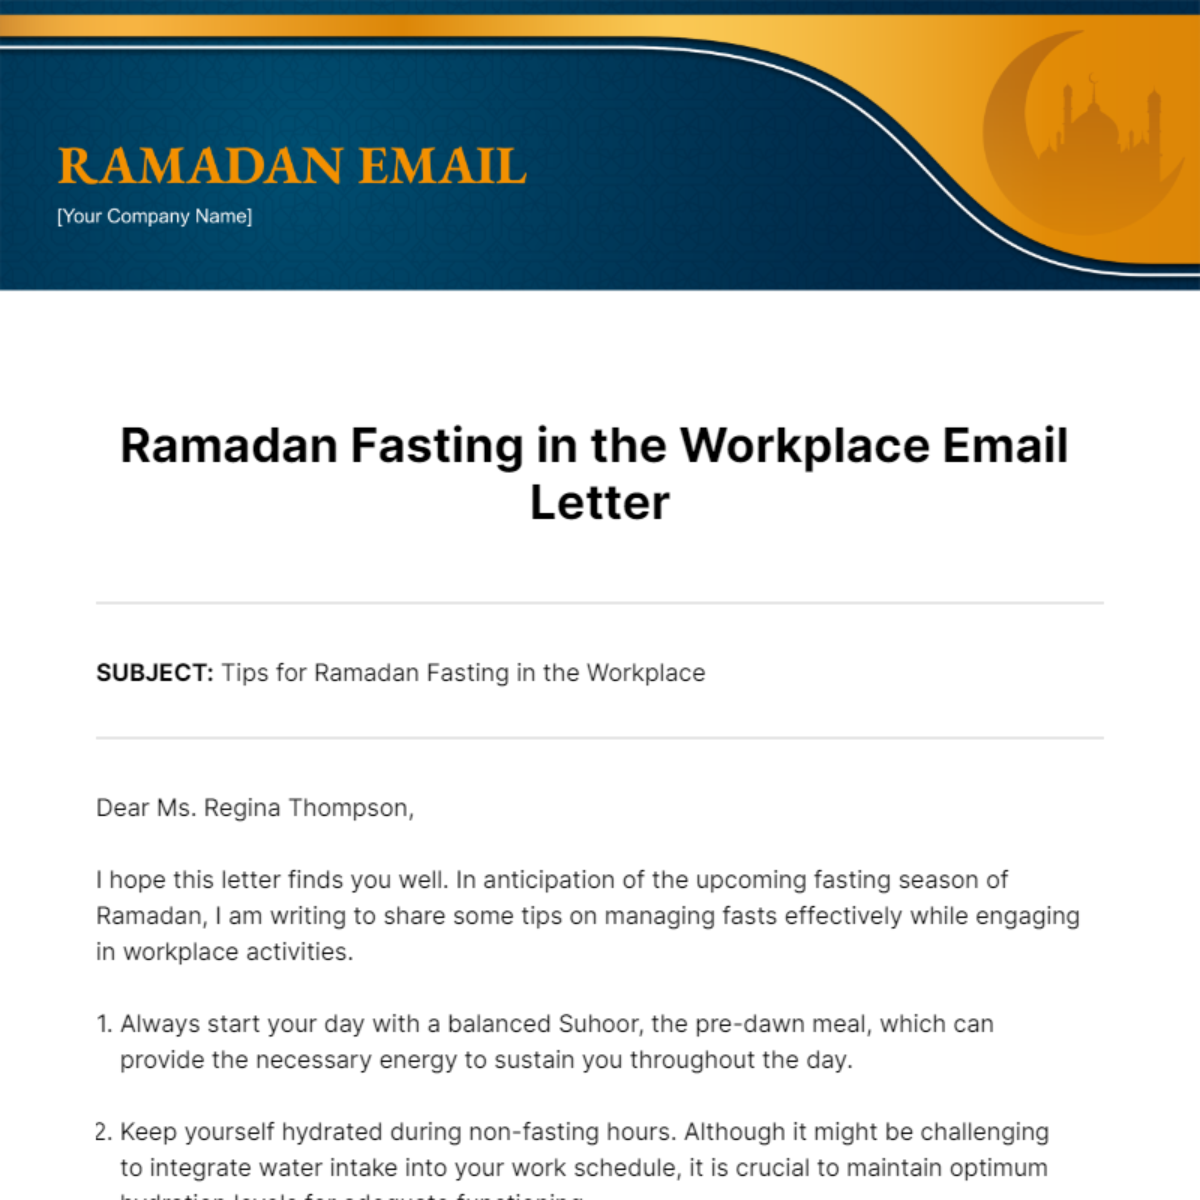 Ramadan Fasting in the Workplace Email Letter Template